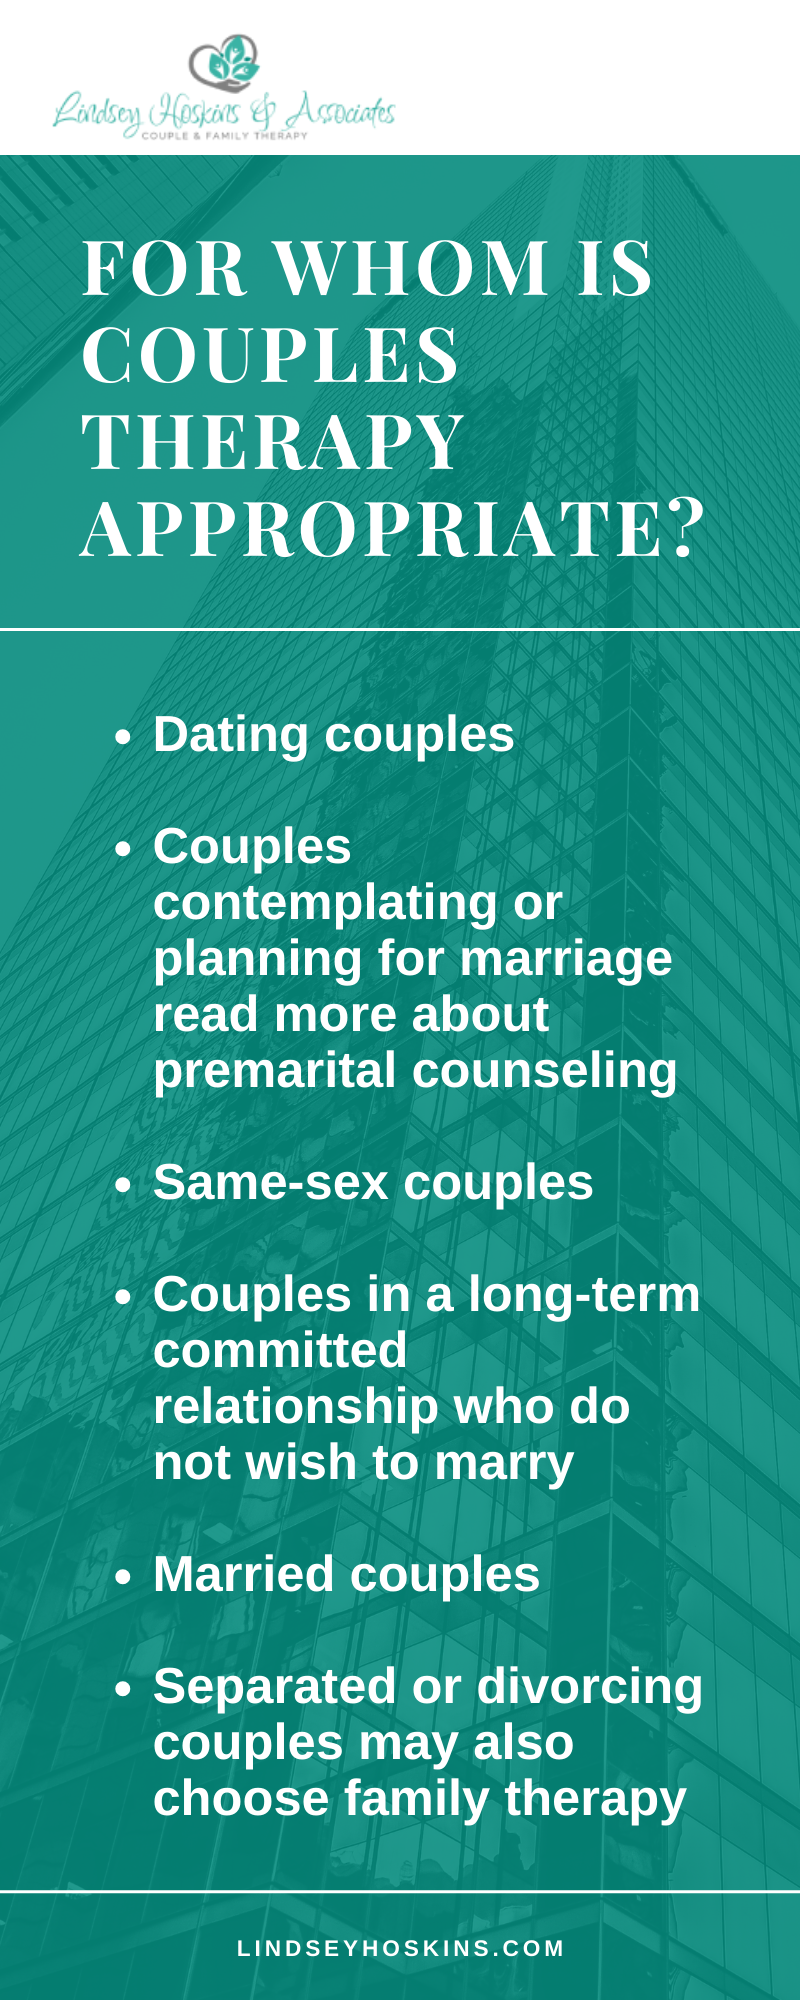 For Whom Is Couples Therapy Appropriate Infographic